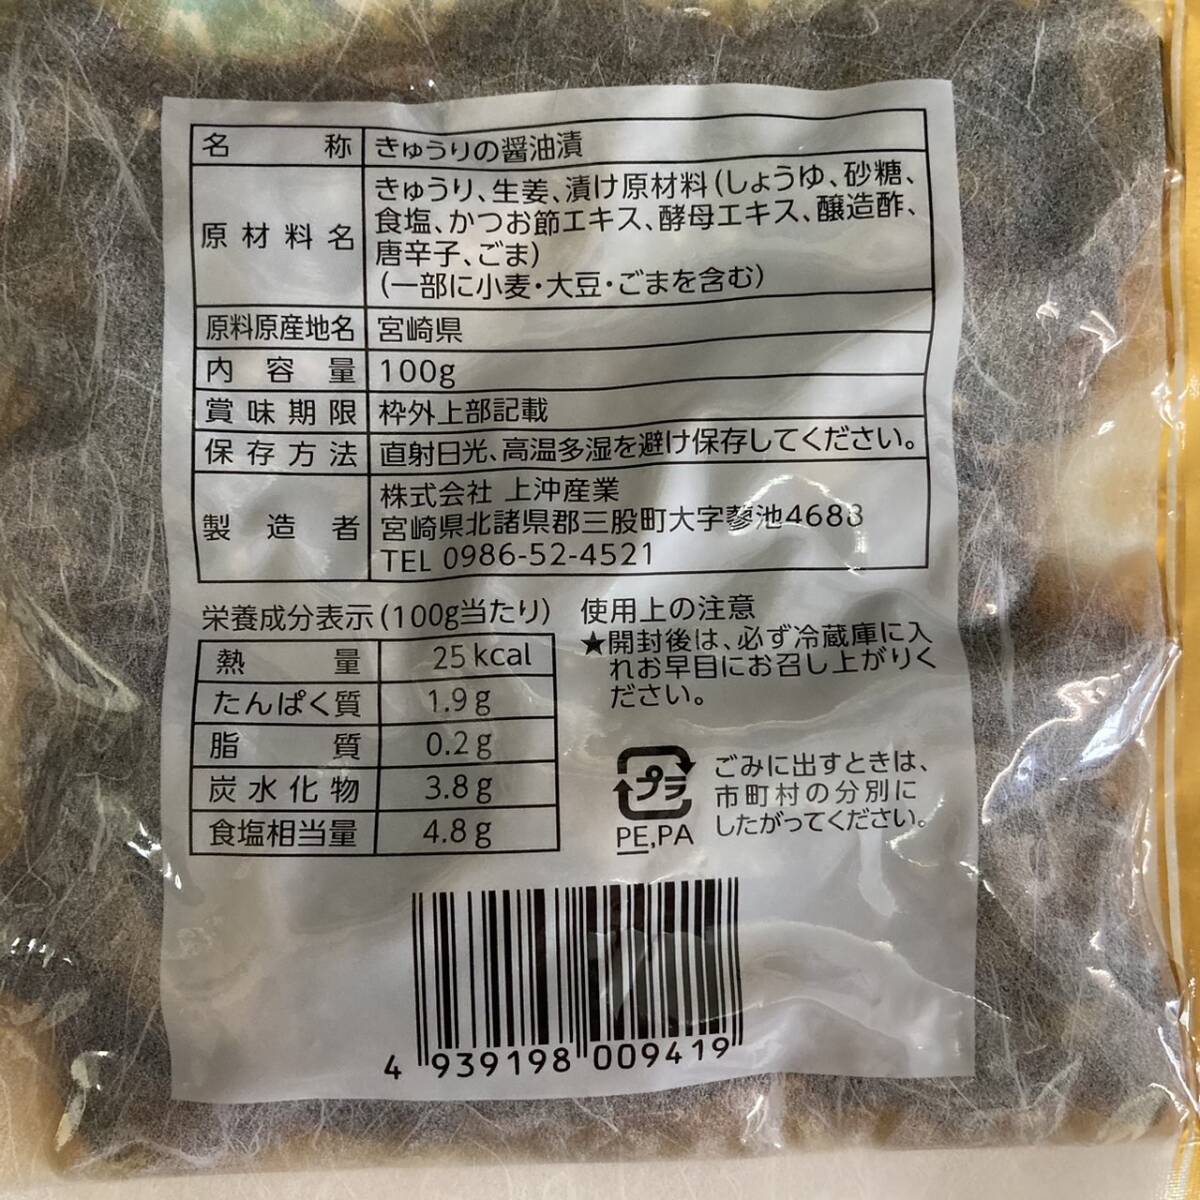 { cucumber oil .} cucumber oil tsukemono pickles * for the first time purchased . person only limitation * Kyushu gourmet Miyazaki processed food thing production goods trial set trial price cheap!